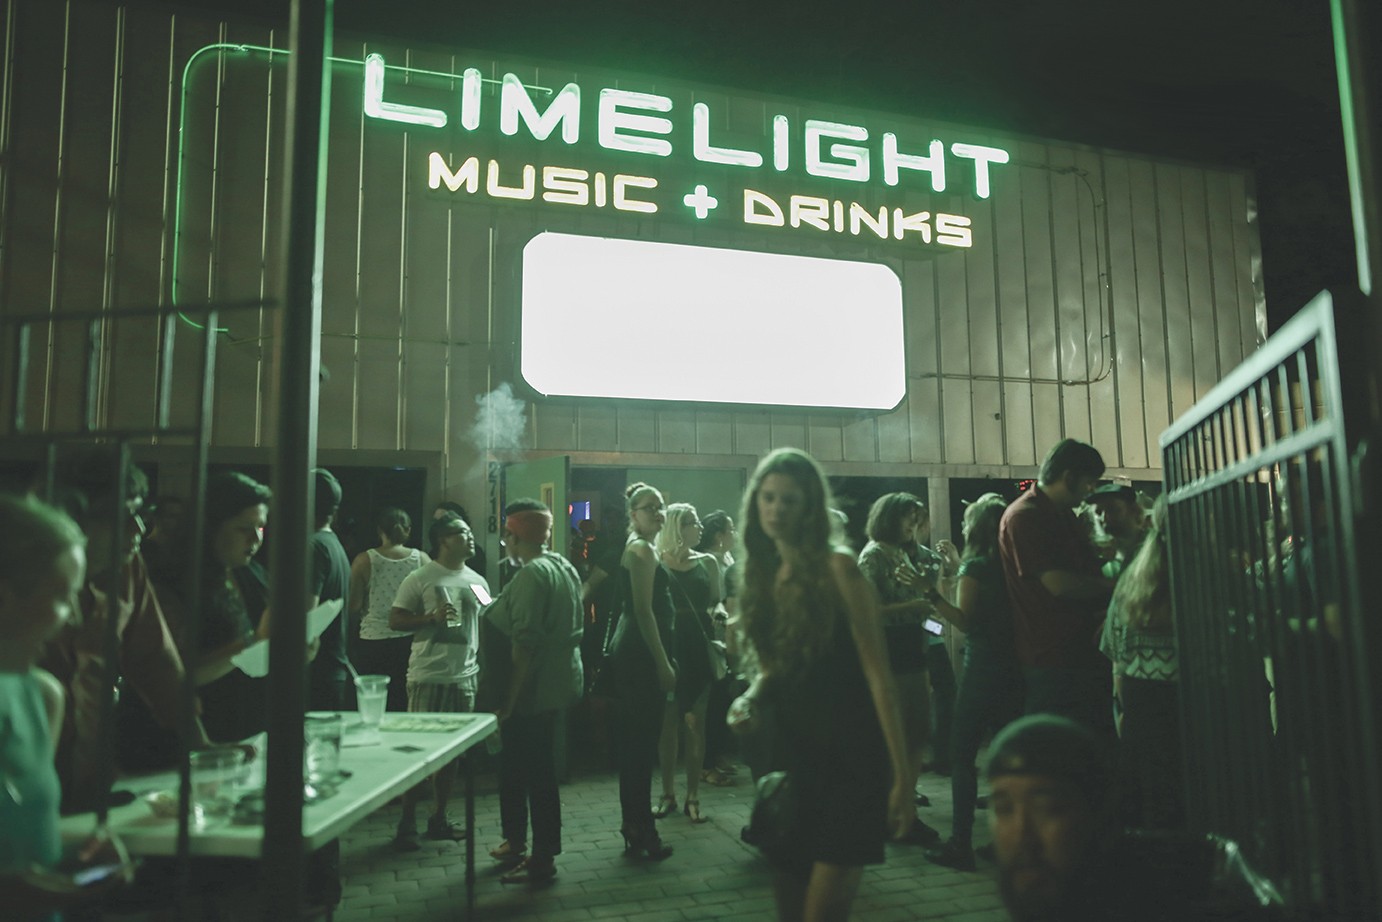 It's baaaack: The Limelight returns with all its neon glory. - Courtesy